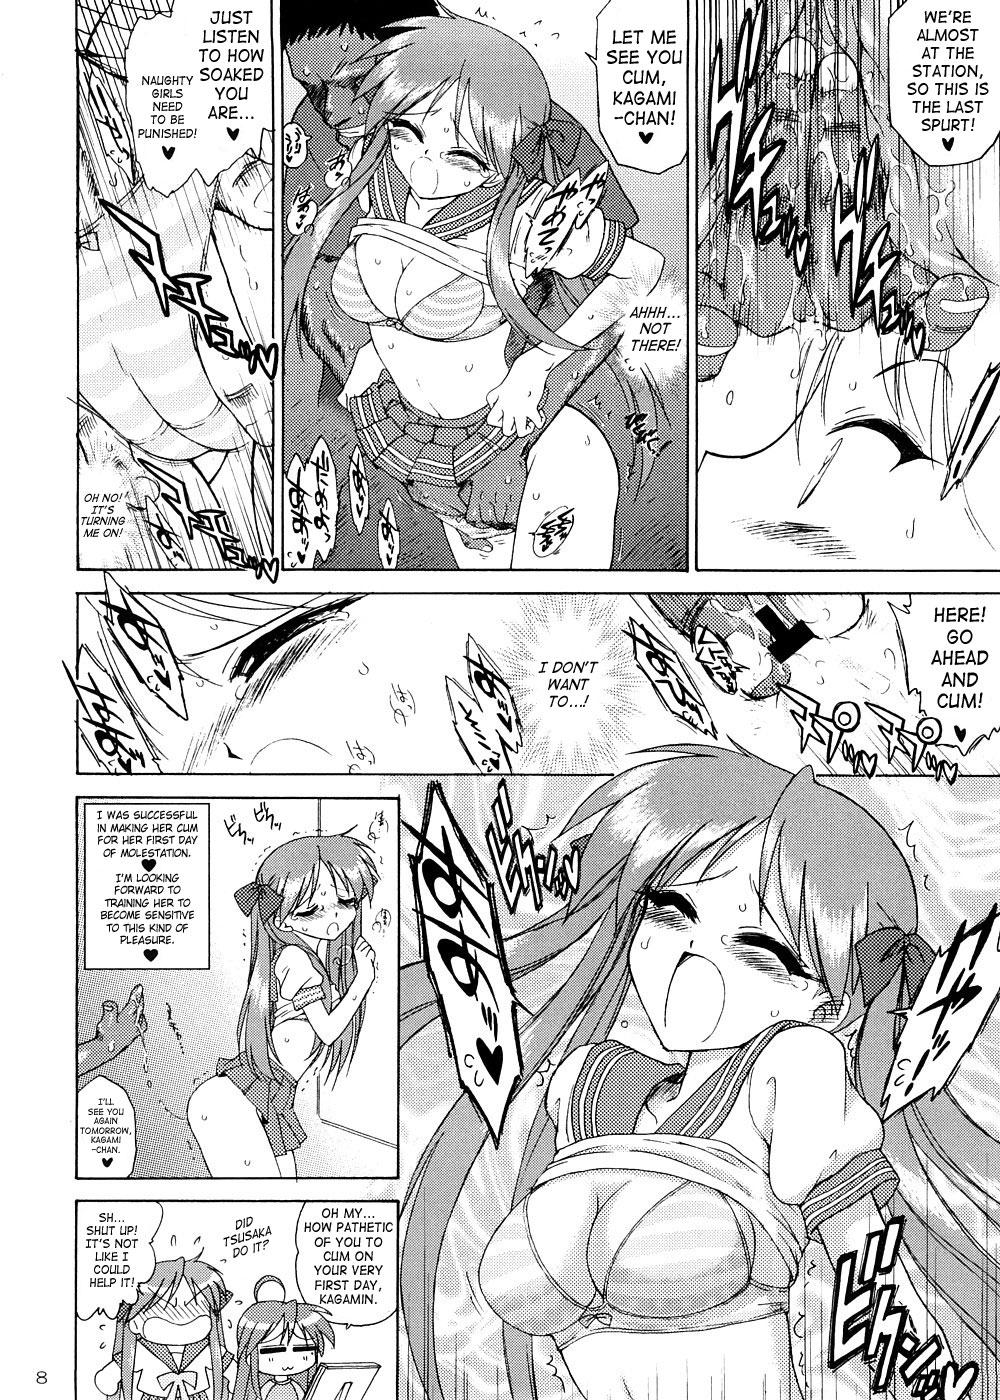 Best Blowjobs Man in the Mirror - Lucky star Fisting - Page 7